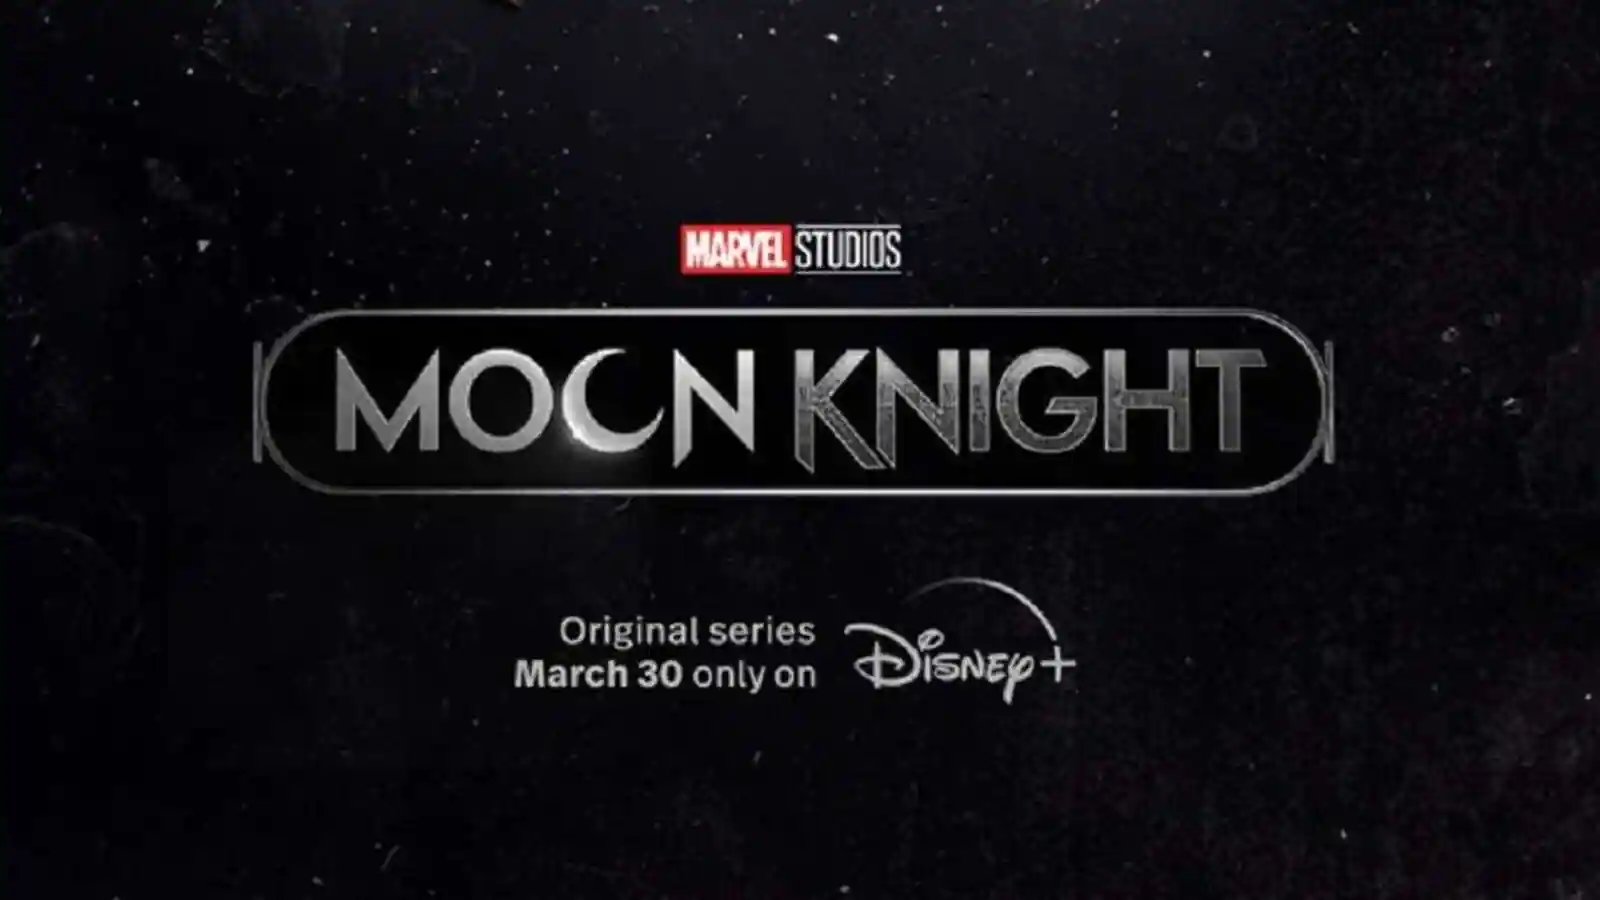 Moon Knight is now streaming exclusively on Disney+